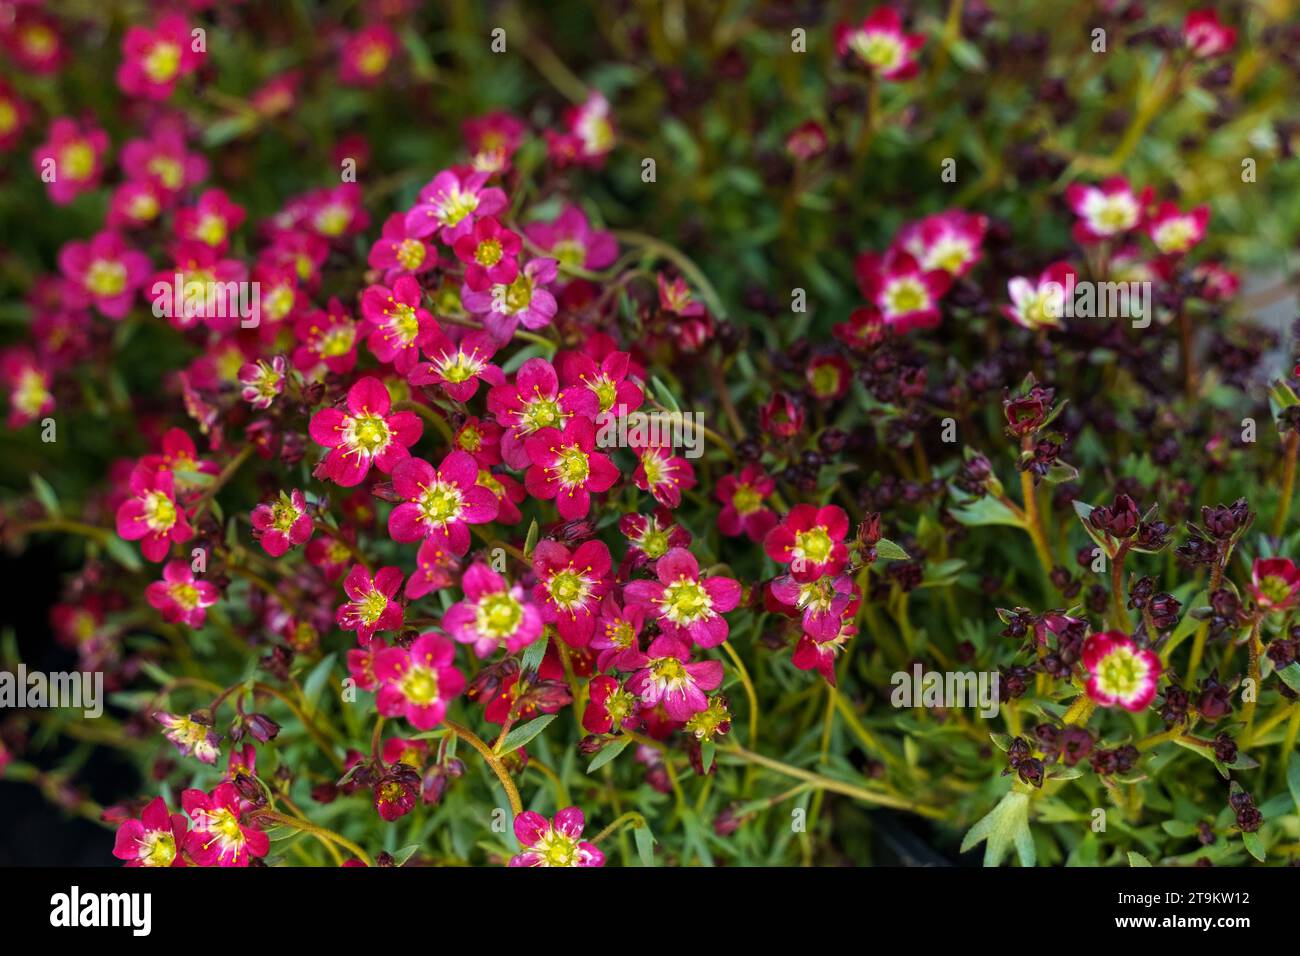 Floral background. Red Saxifraga flowers bloom in the flowerbed. Stock Photo